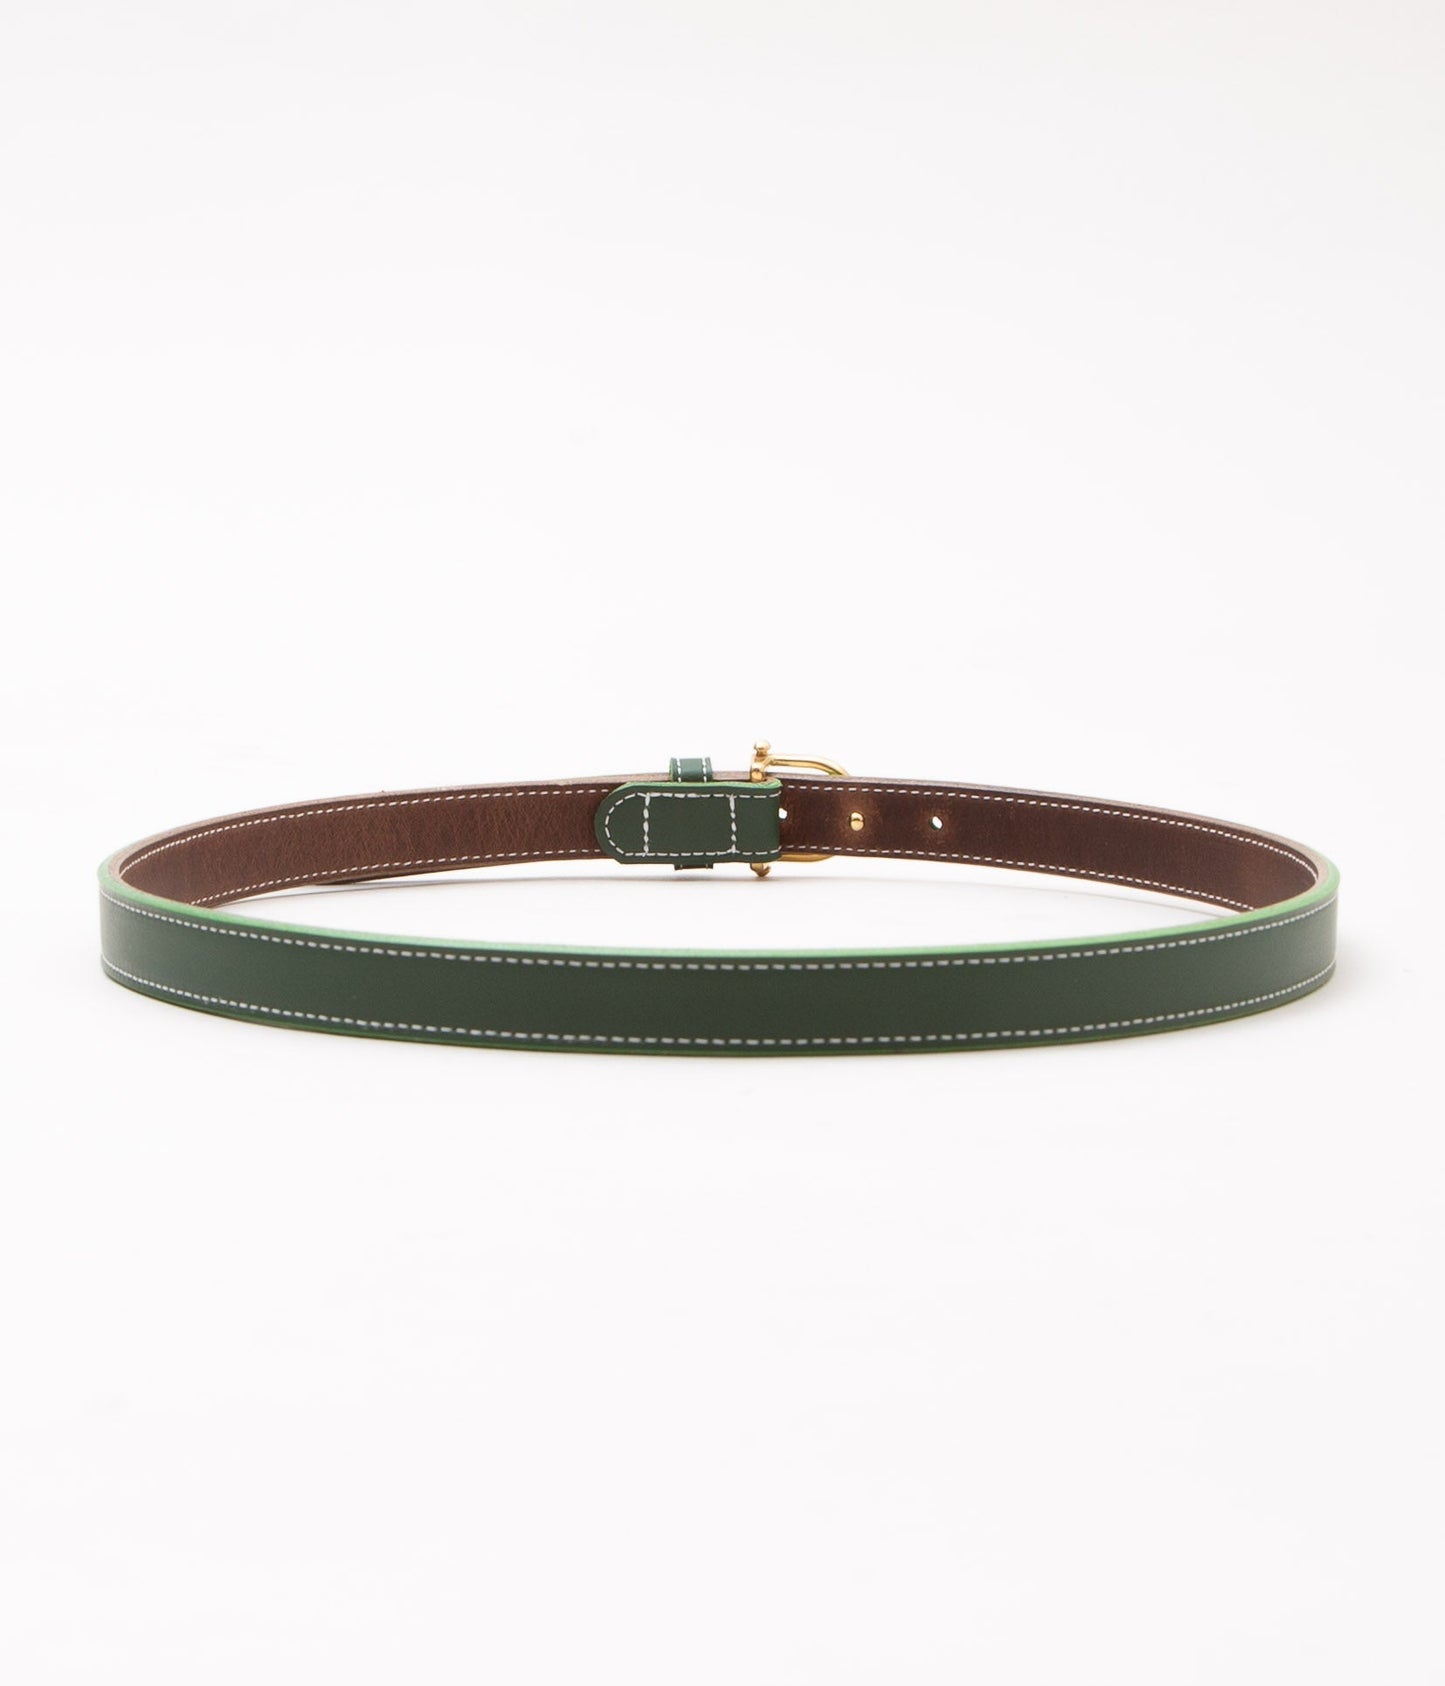 TORY LEATHER "【3005】 EQUESTRIAN INSPIRED BELT"(KELLY GREEN/BRASS)